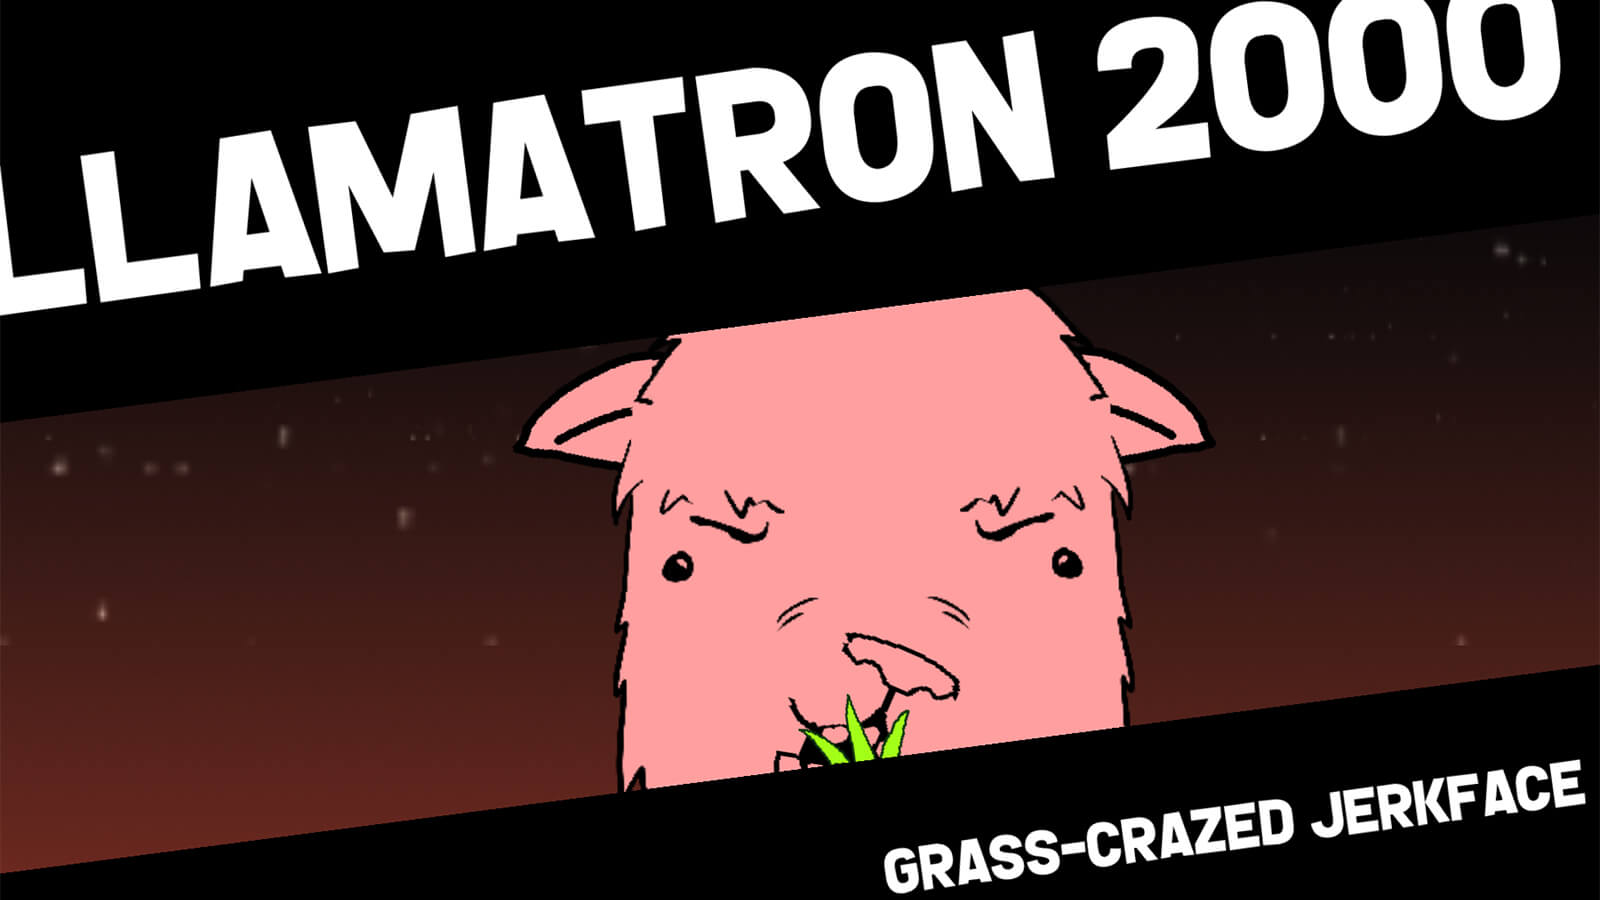 Head-on shot of a 2D-painted pink llama chewing grass. "Llamatron 2000" is seen in white letters above.